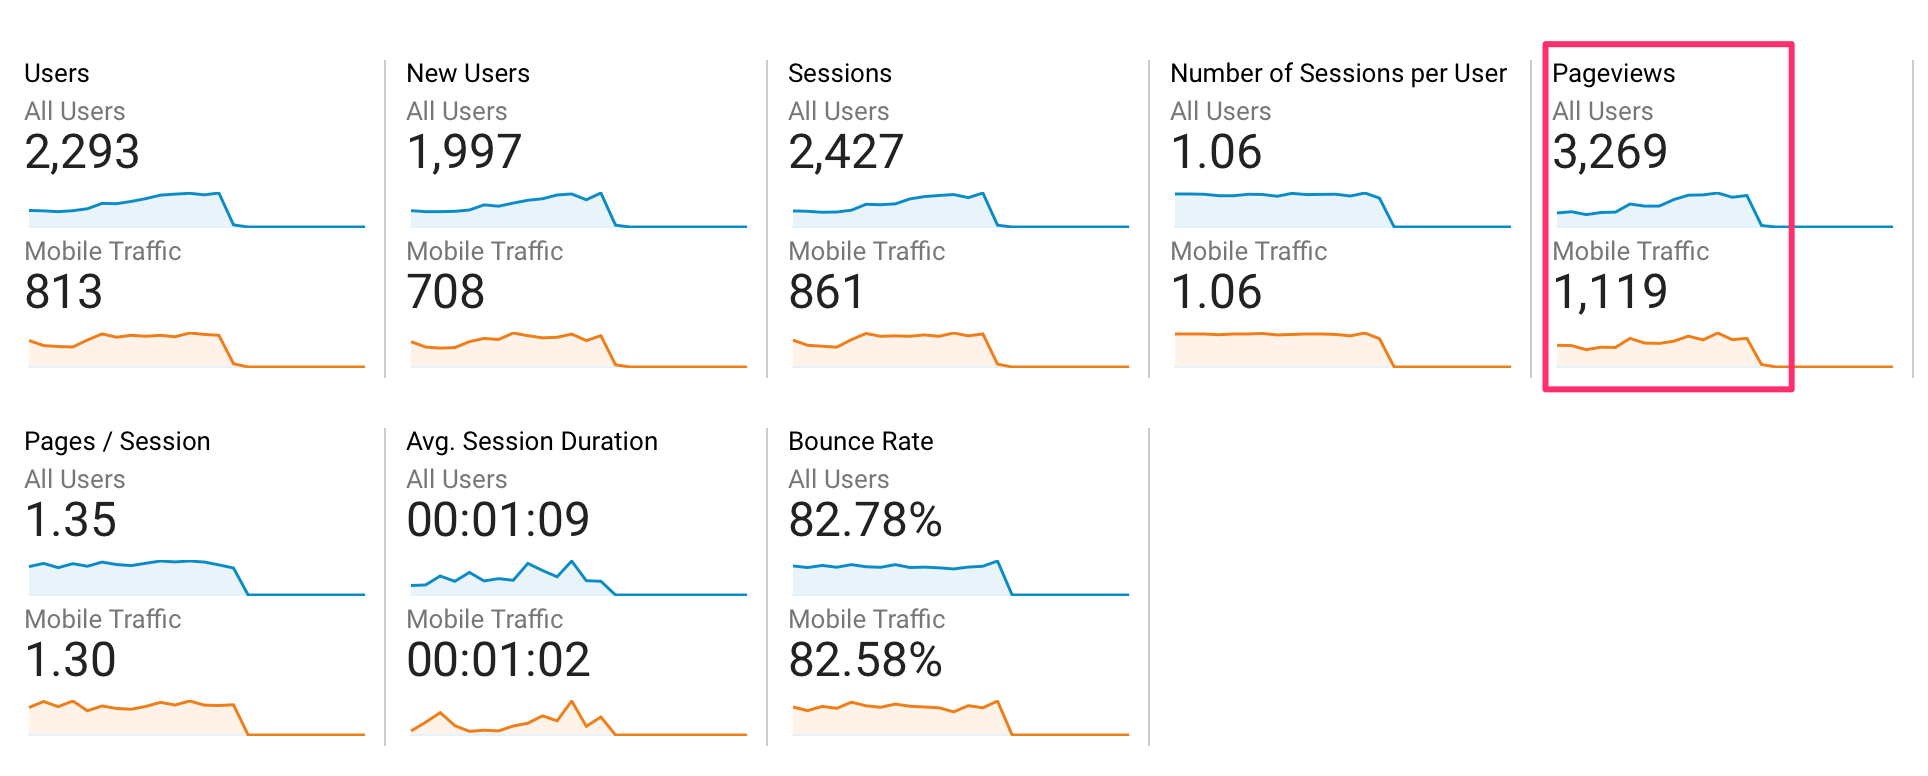 Pageviews from Mobile Traffic